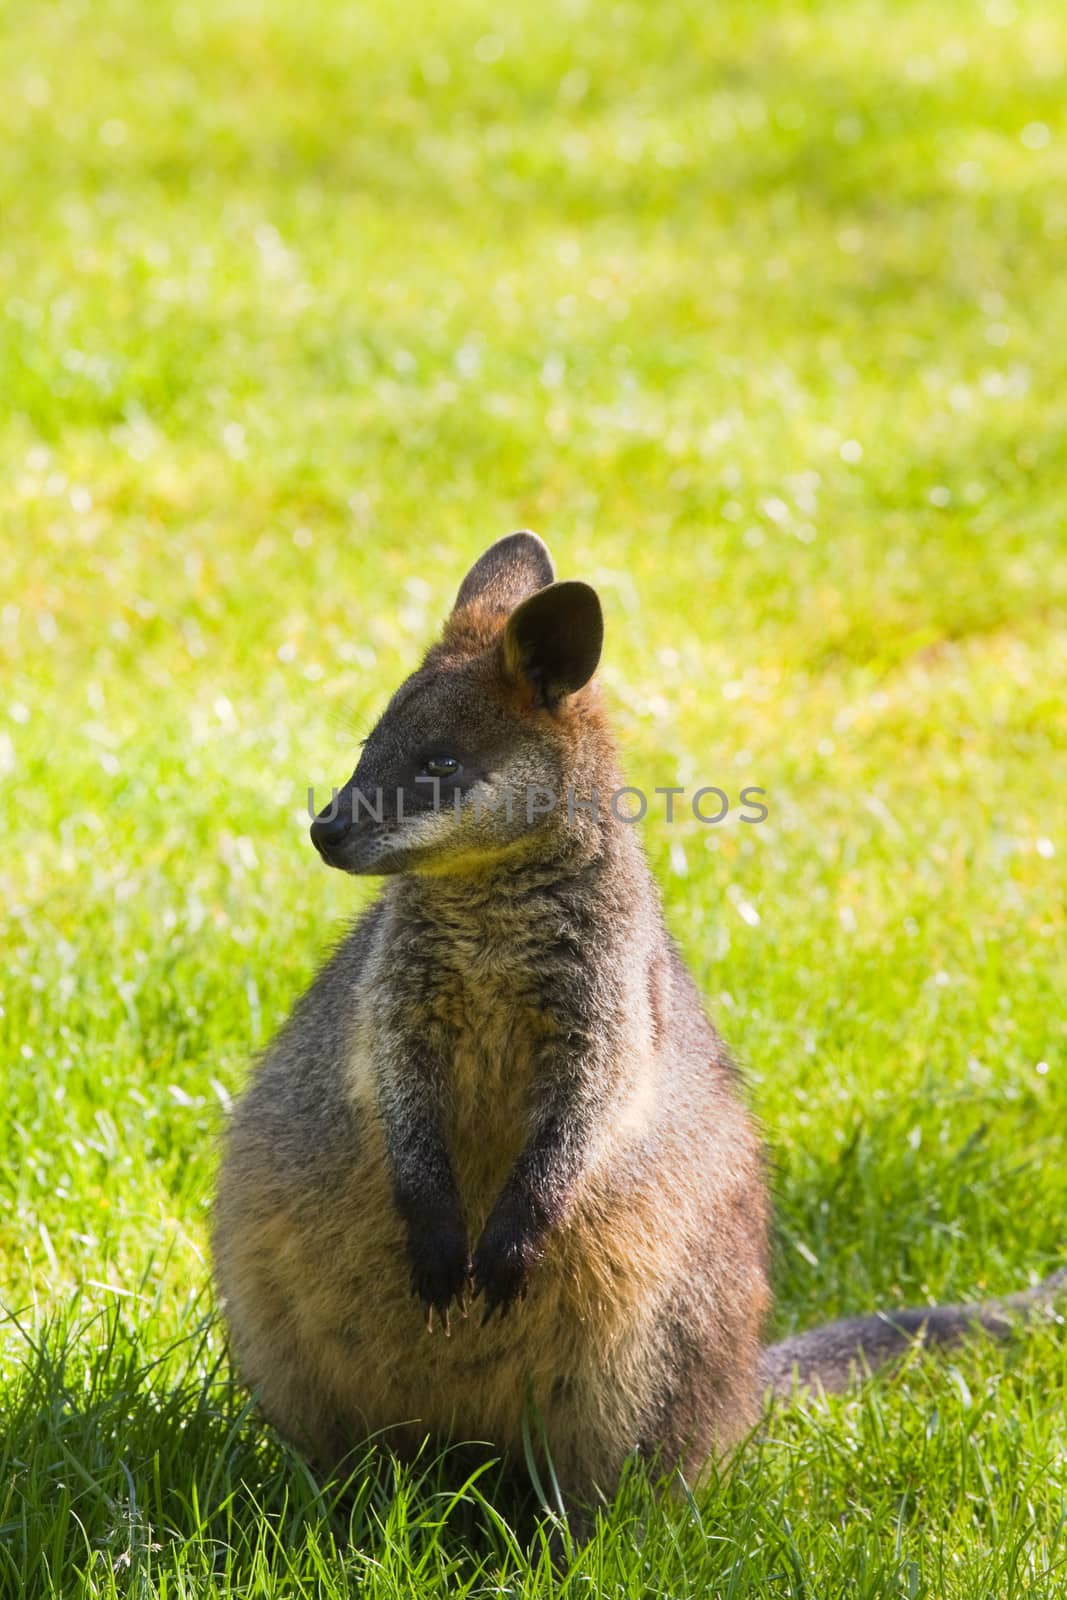 Cute little Swamp- or Black Wallaby on grassland